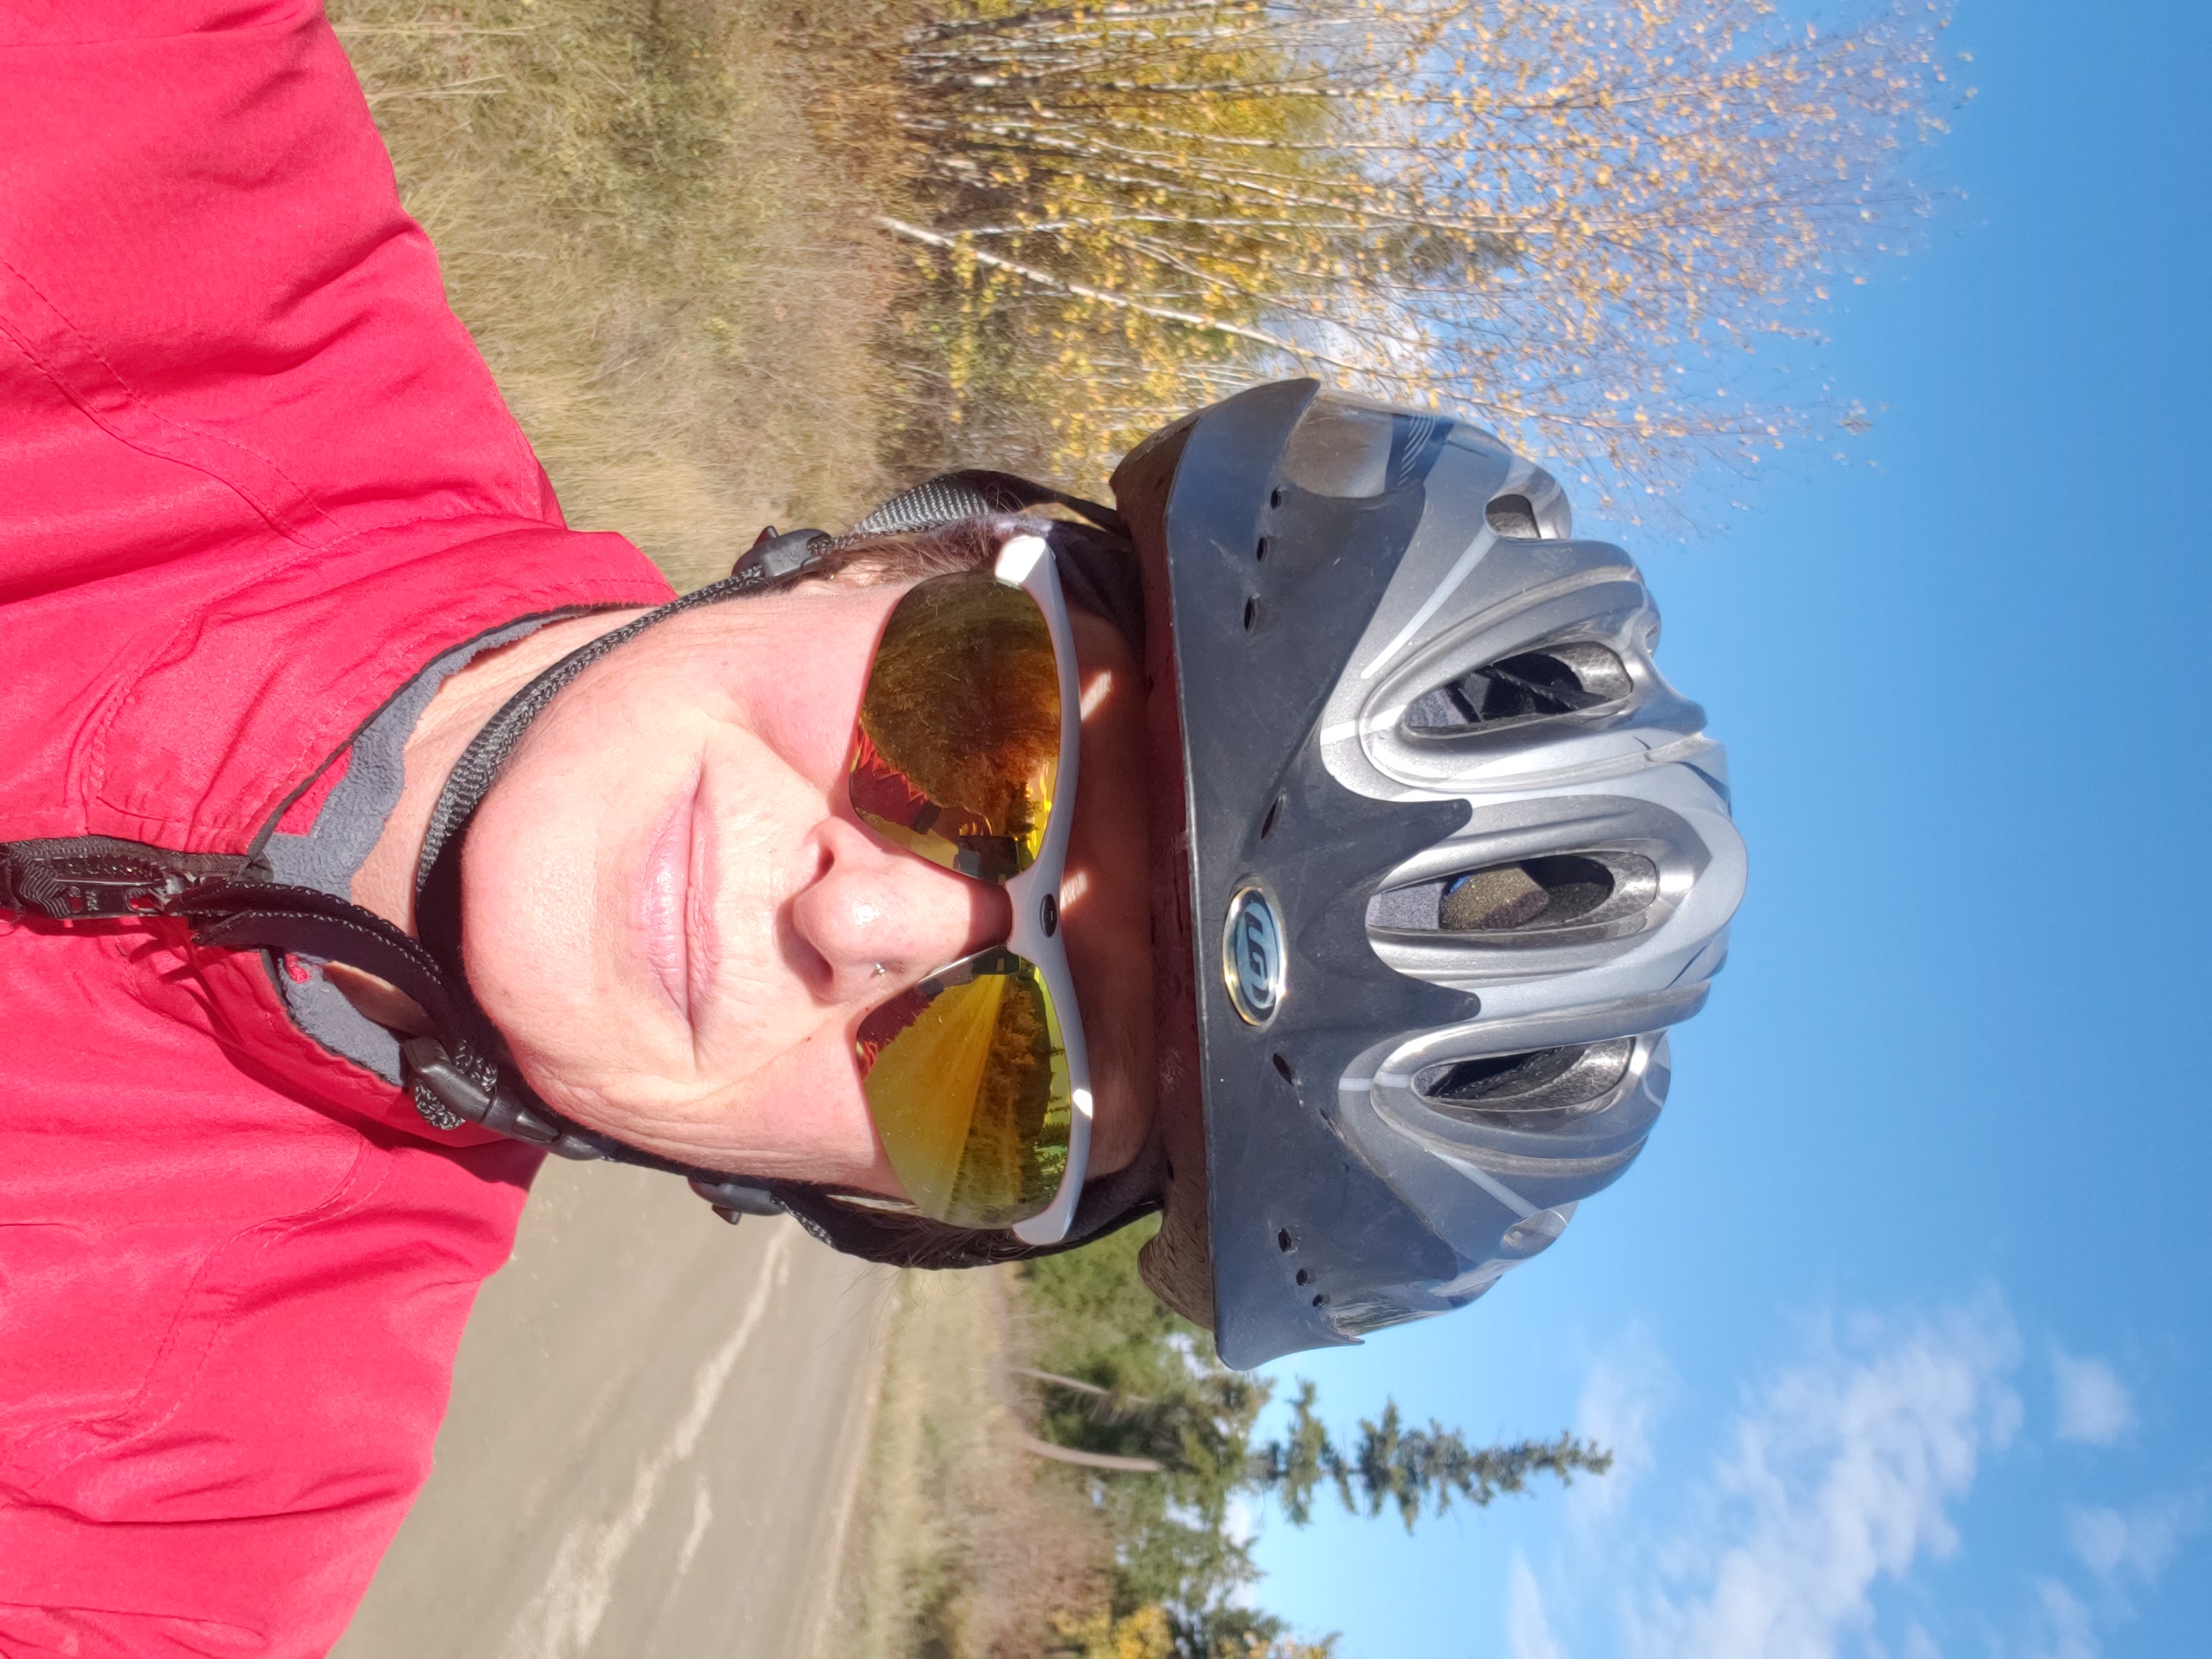 A selfie of a woman wearing a red jacket, sunglasses and a biking helmet.